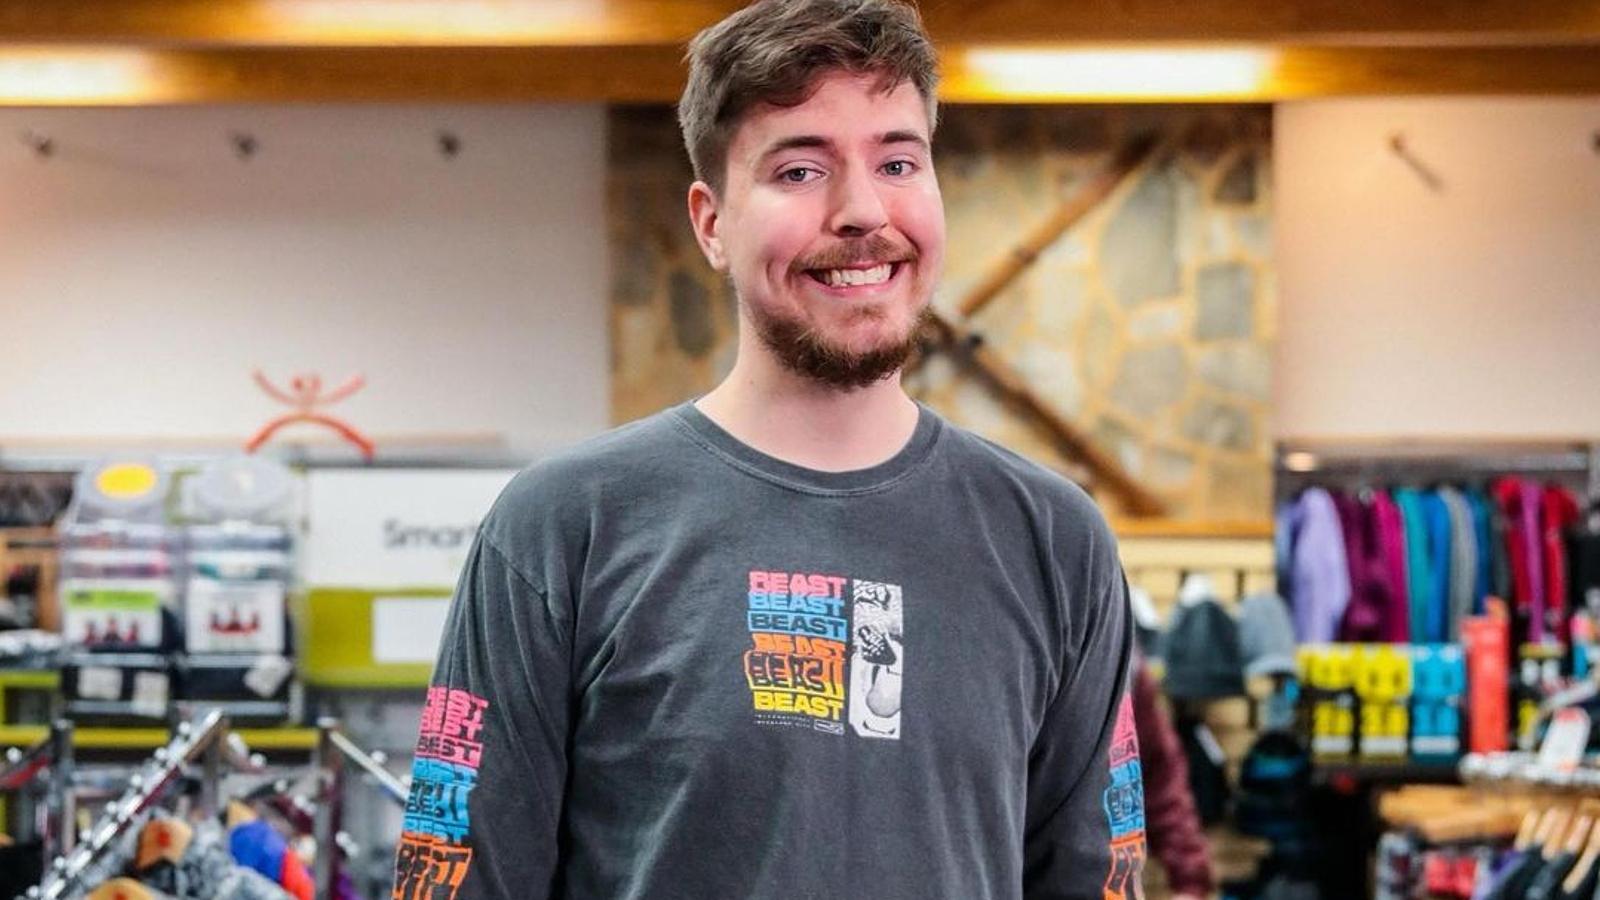 The ONLY Official Merch Store for MrBeast in the world –